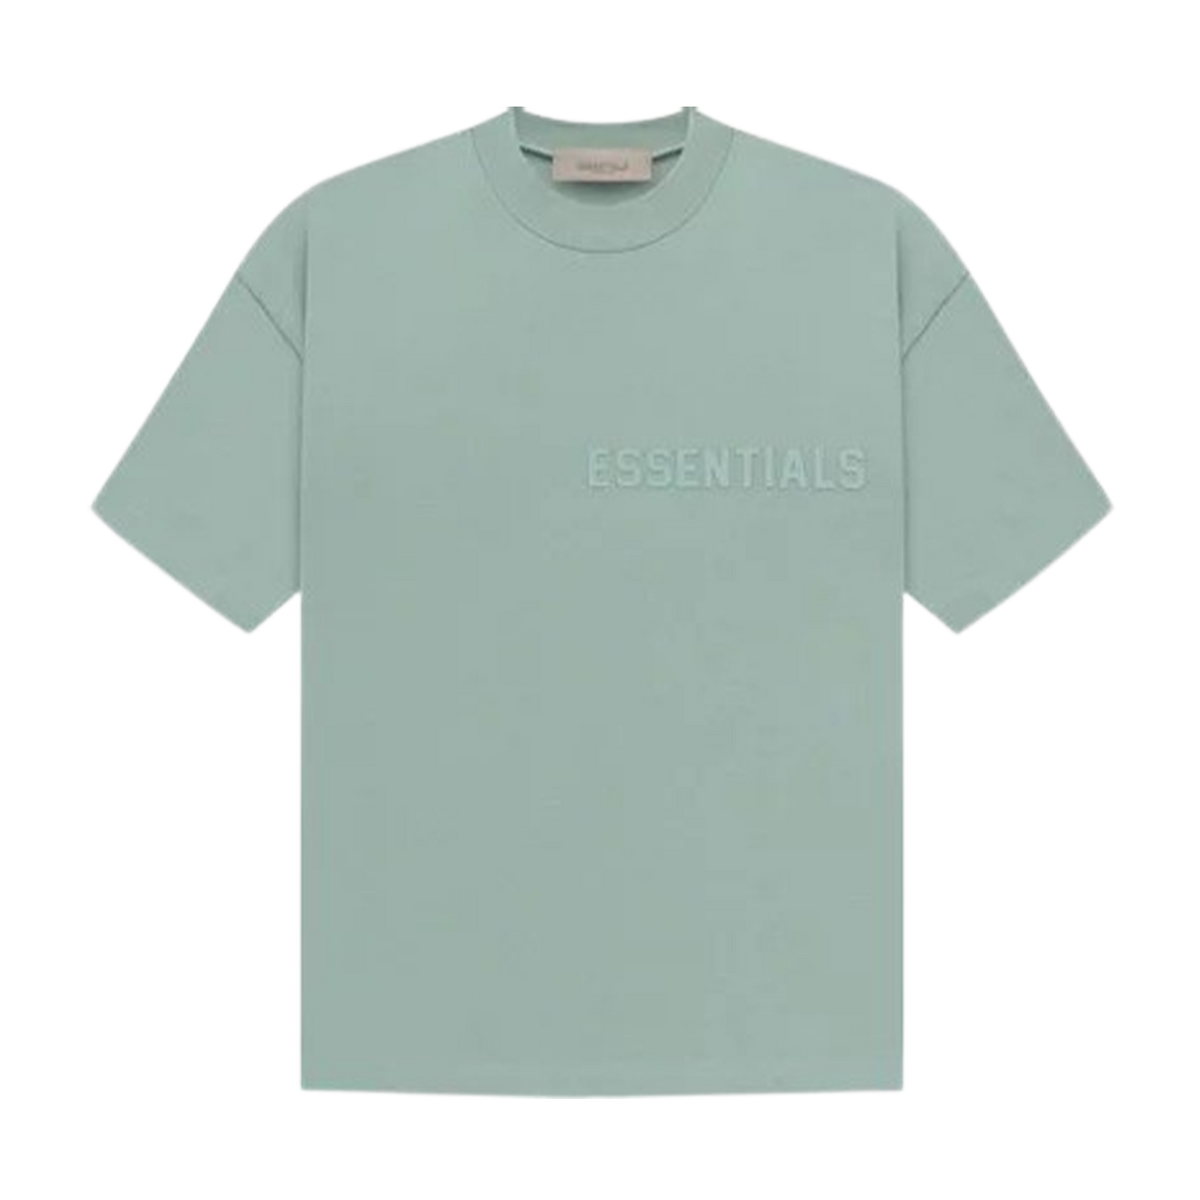 Fear of God Essentials Short-Sleeve Tee 'Sycamore'